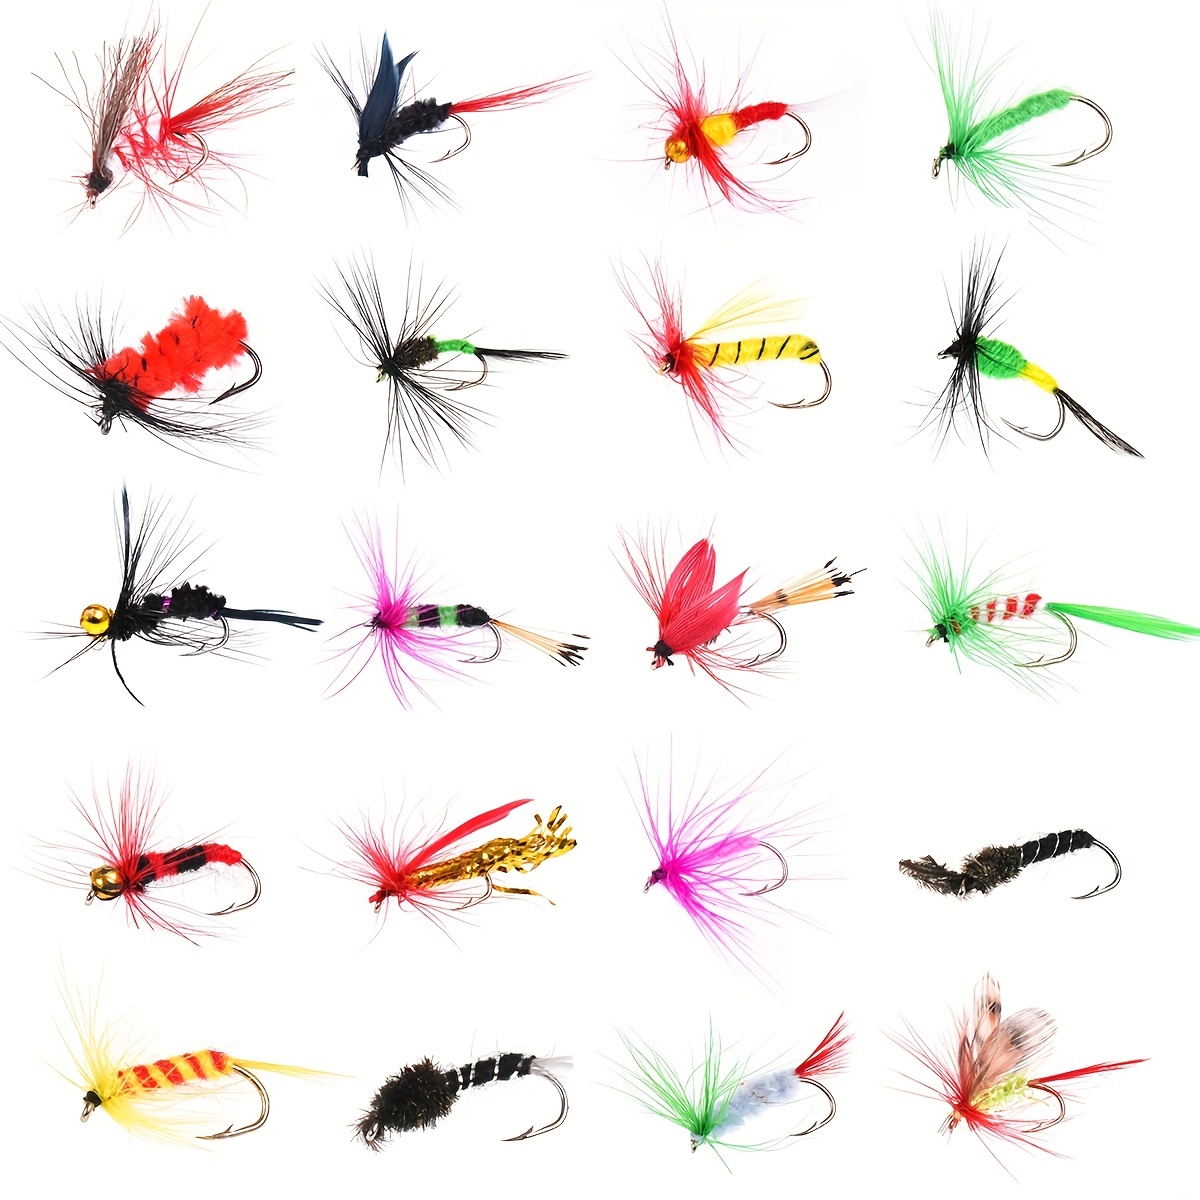 OriGlam 10pcs Fly Fishing Lures Kit Fishing Fly, Fly Fishing Kit Fly  Fishing Lures, Fly Fishing Handmade Lures Assortment Kit Artificial Bait  Hooks for Bass Trout Salmon Fishing : : Sports 